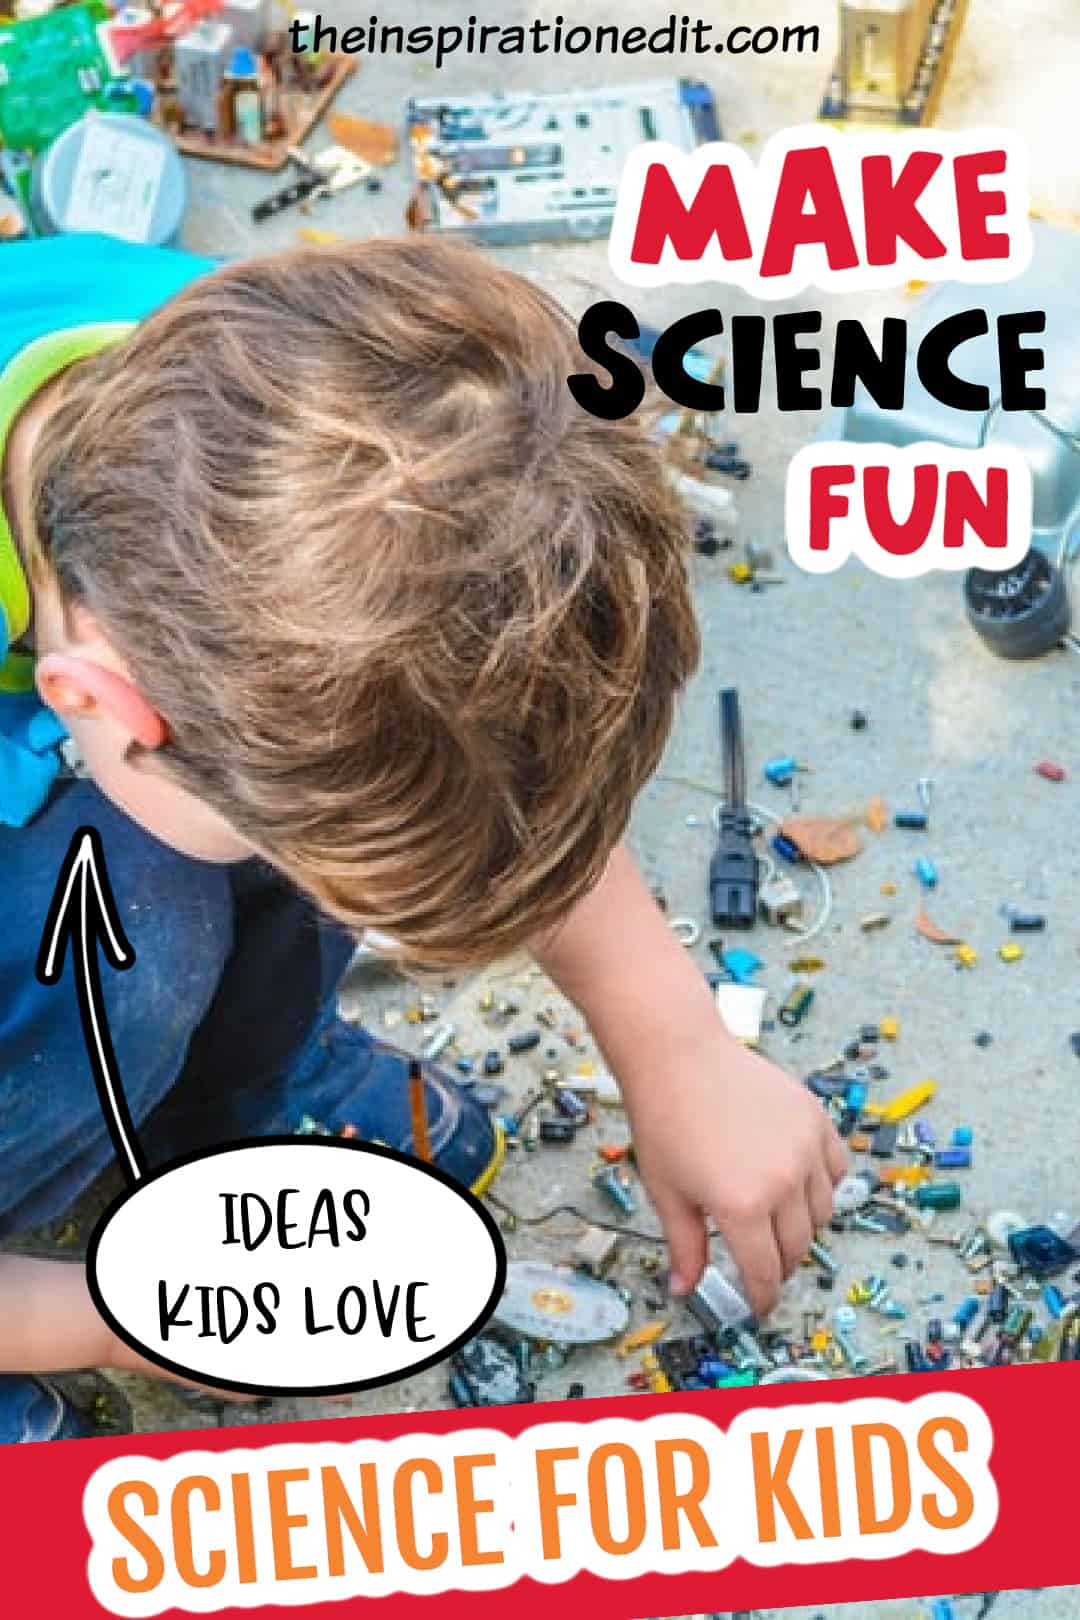 7 Ways to Make Science Fun for Your Kids · The Inspiration Edit